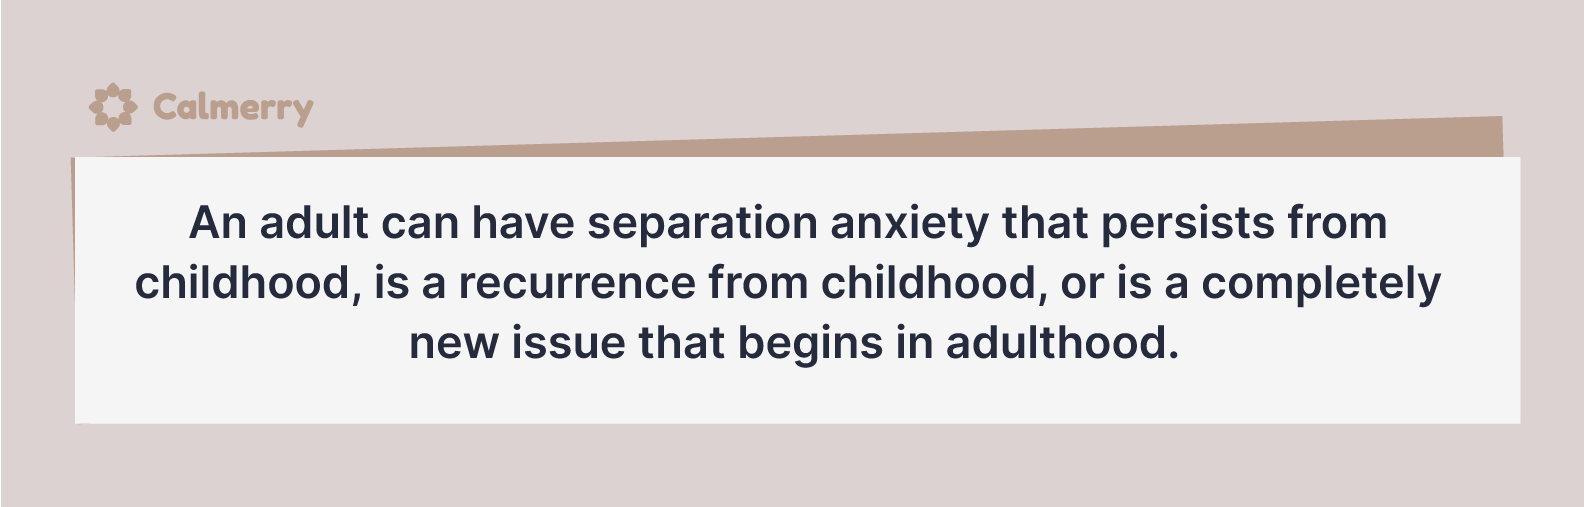 An adult can have separation anxiety that persists from childhood